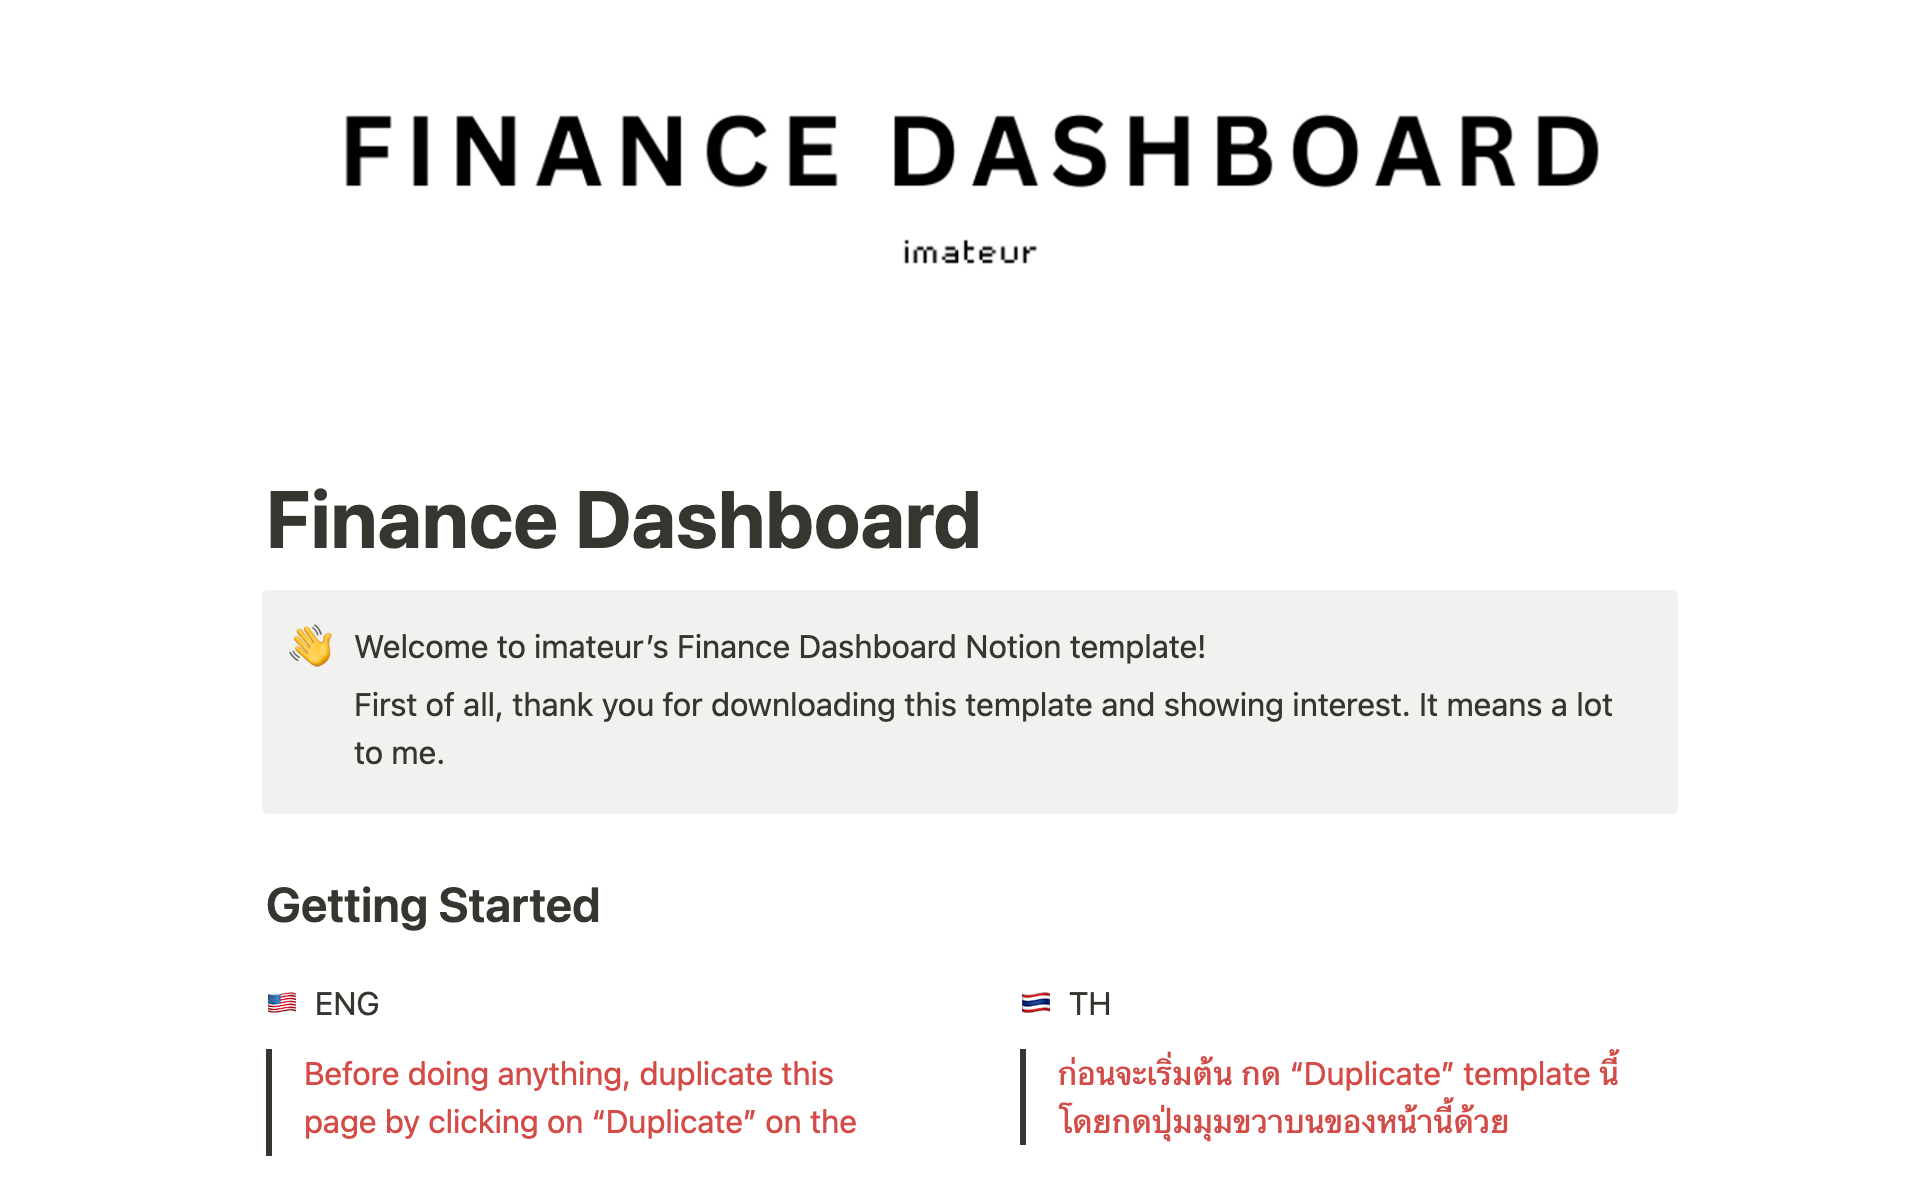 Track monthly finances with customizable budgets and expense categories.